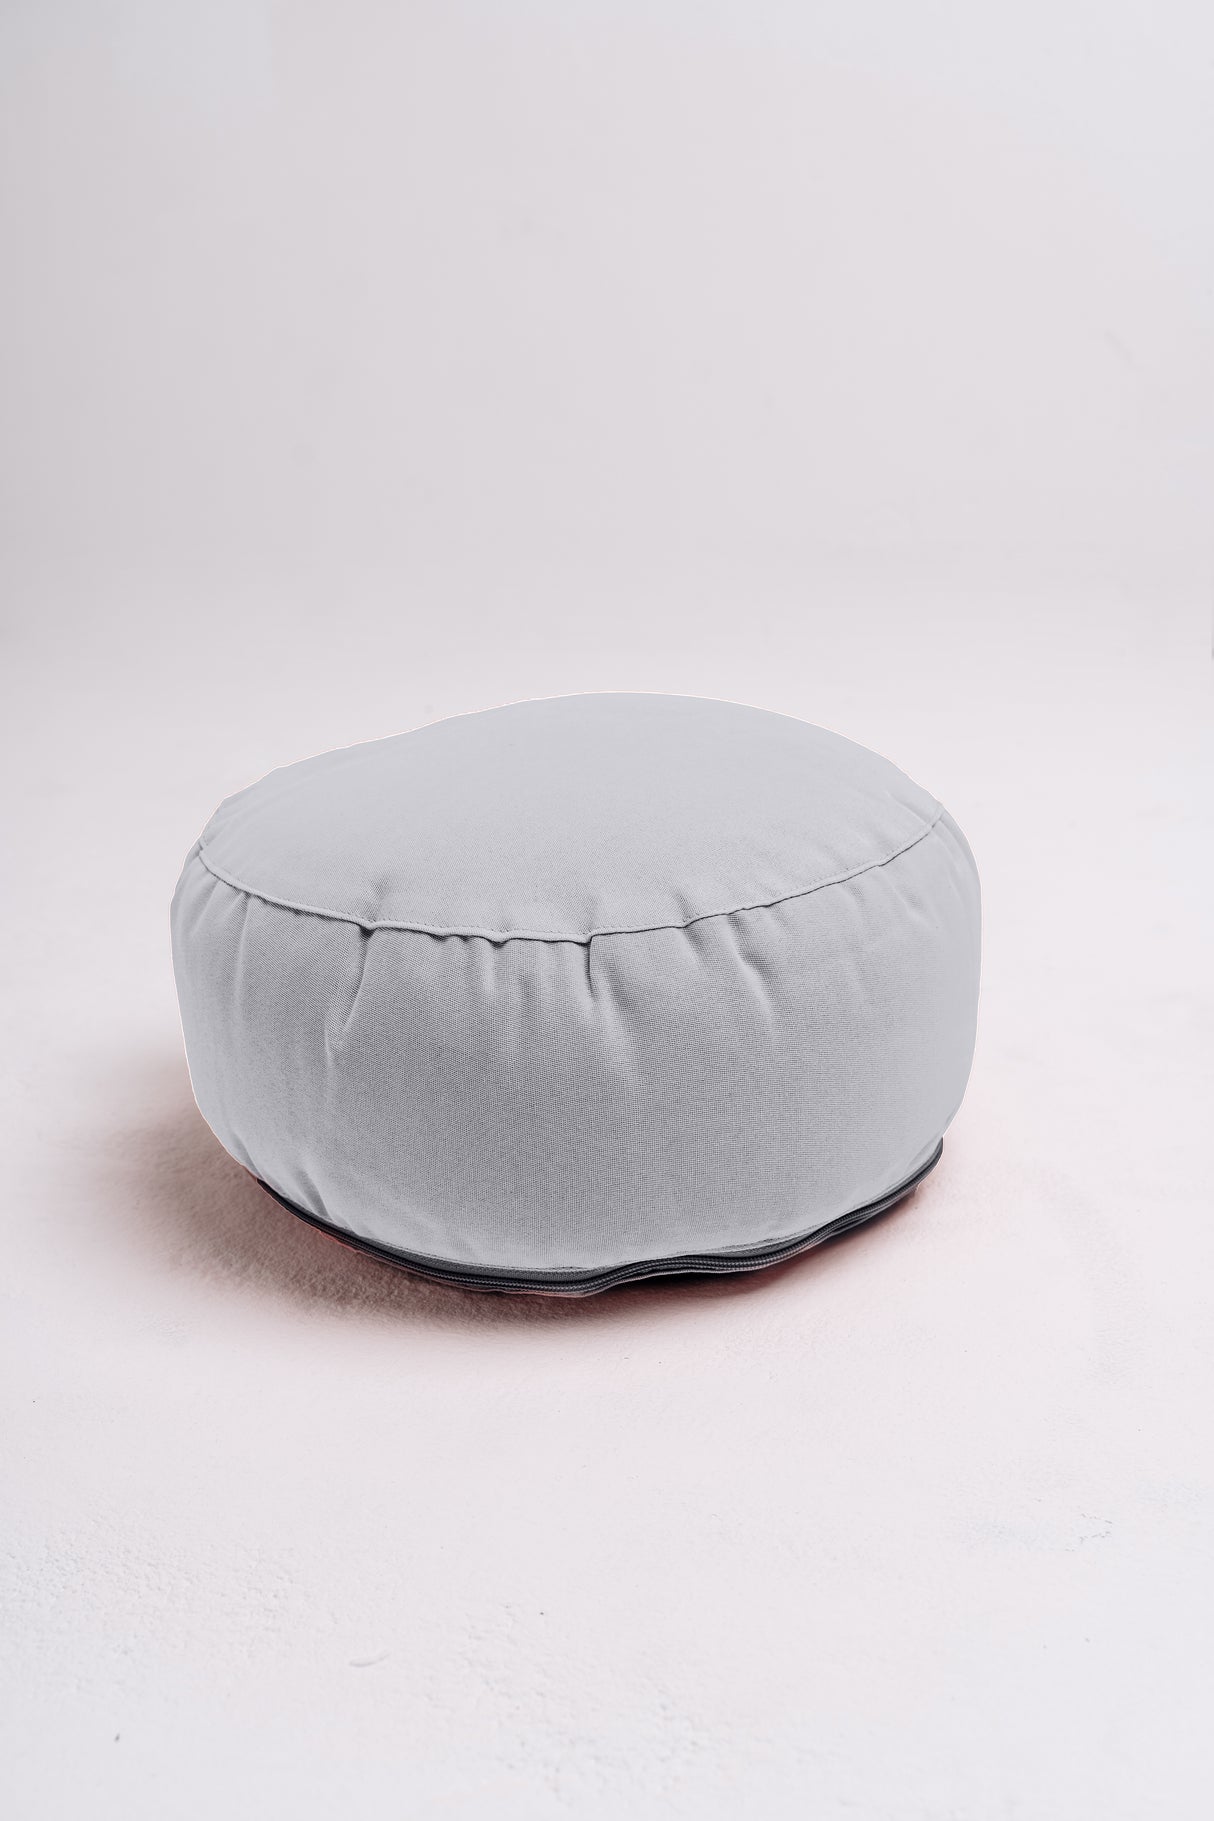 Meditation Pillow Simple from RamaYoga